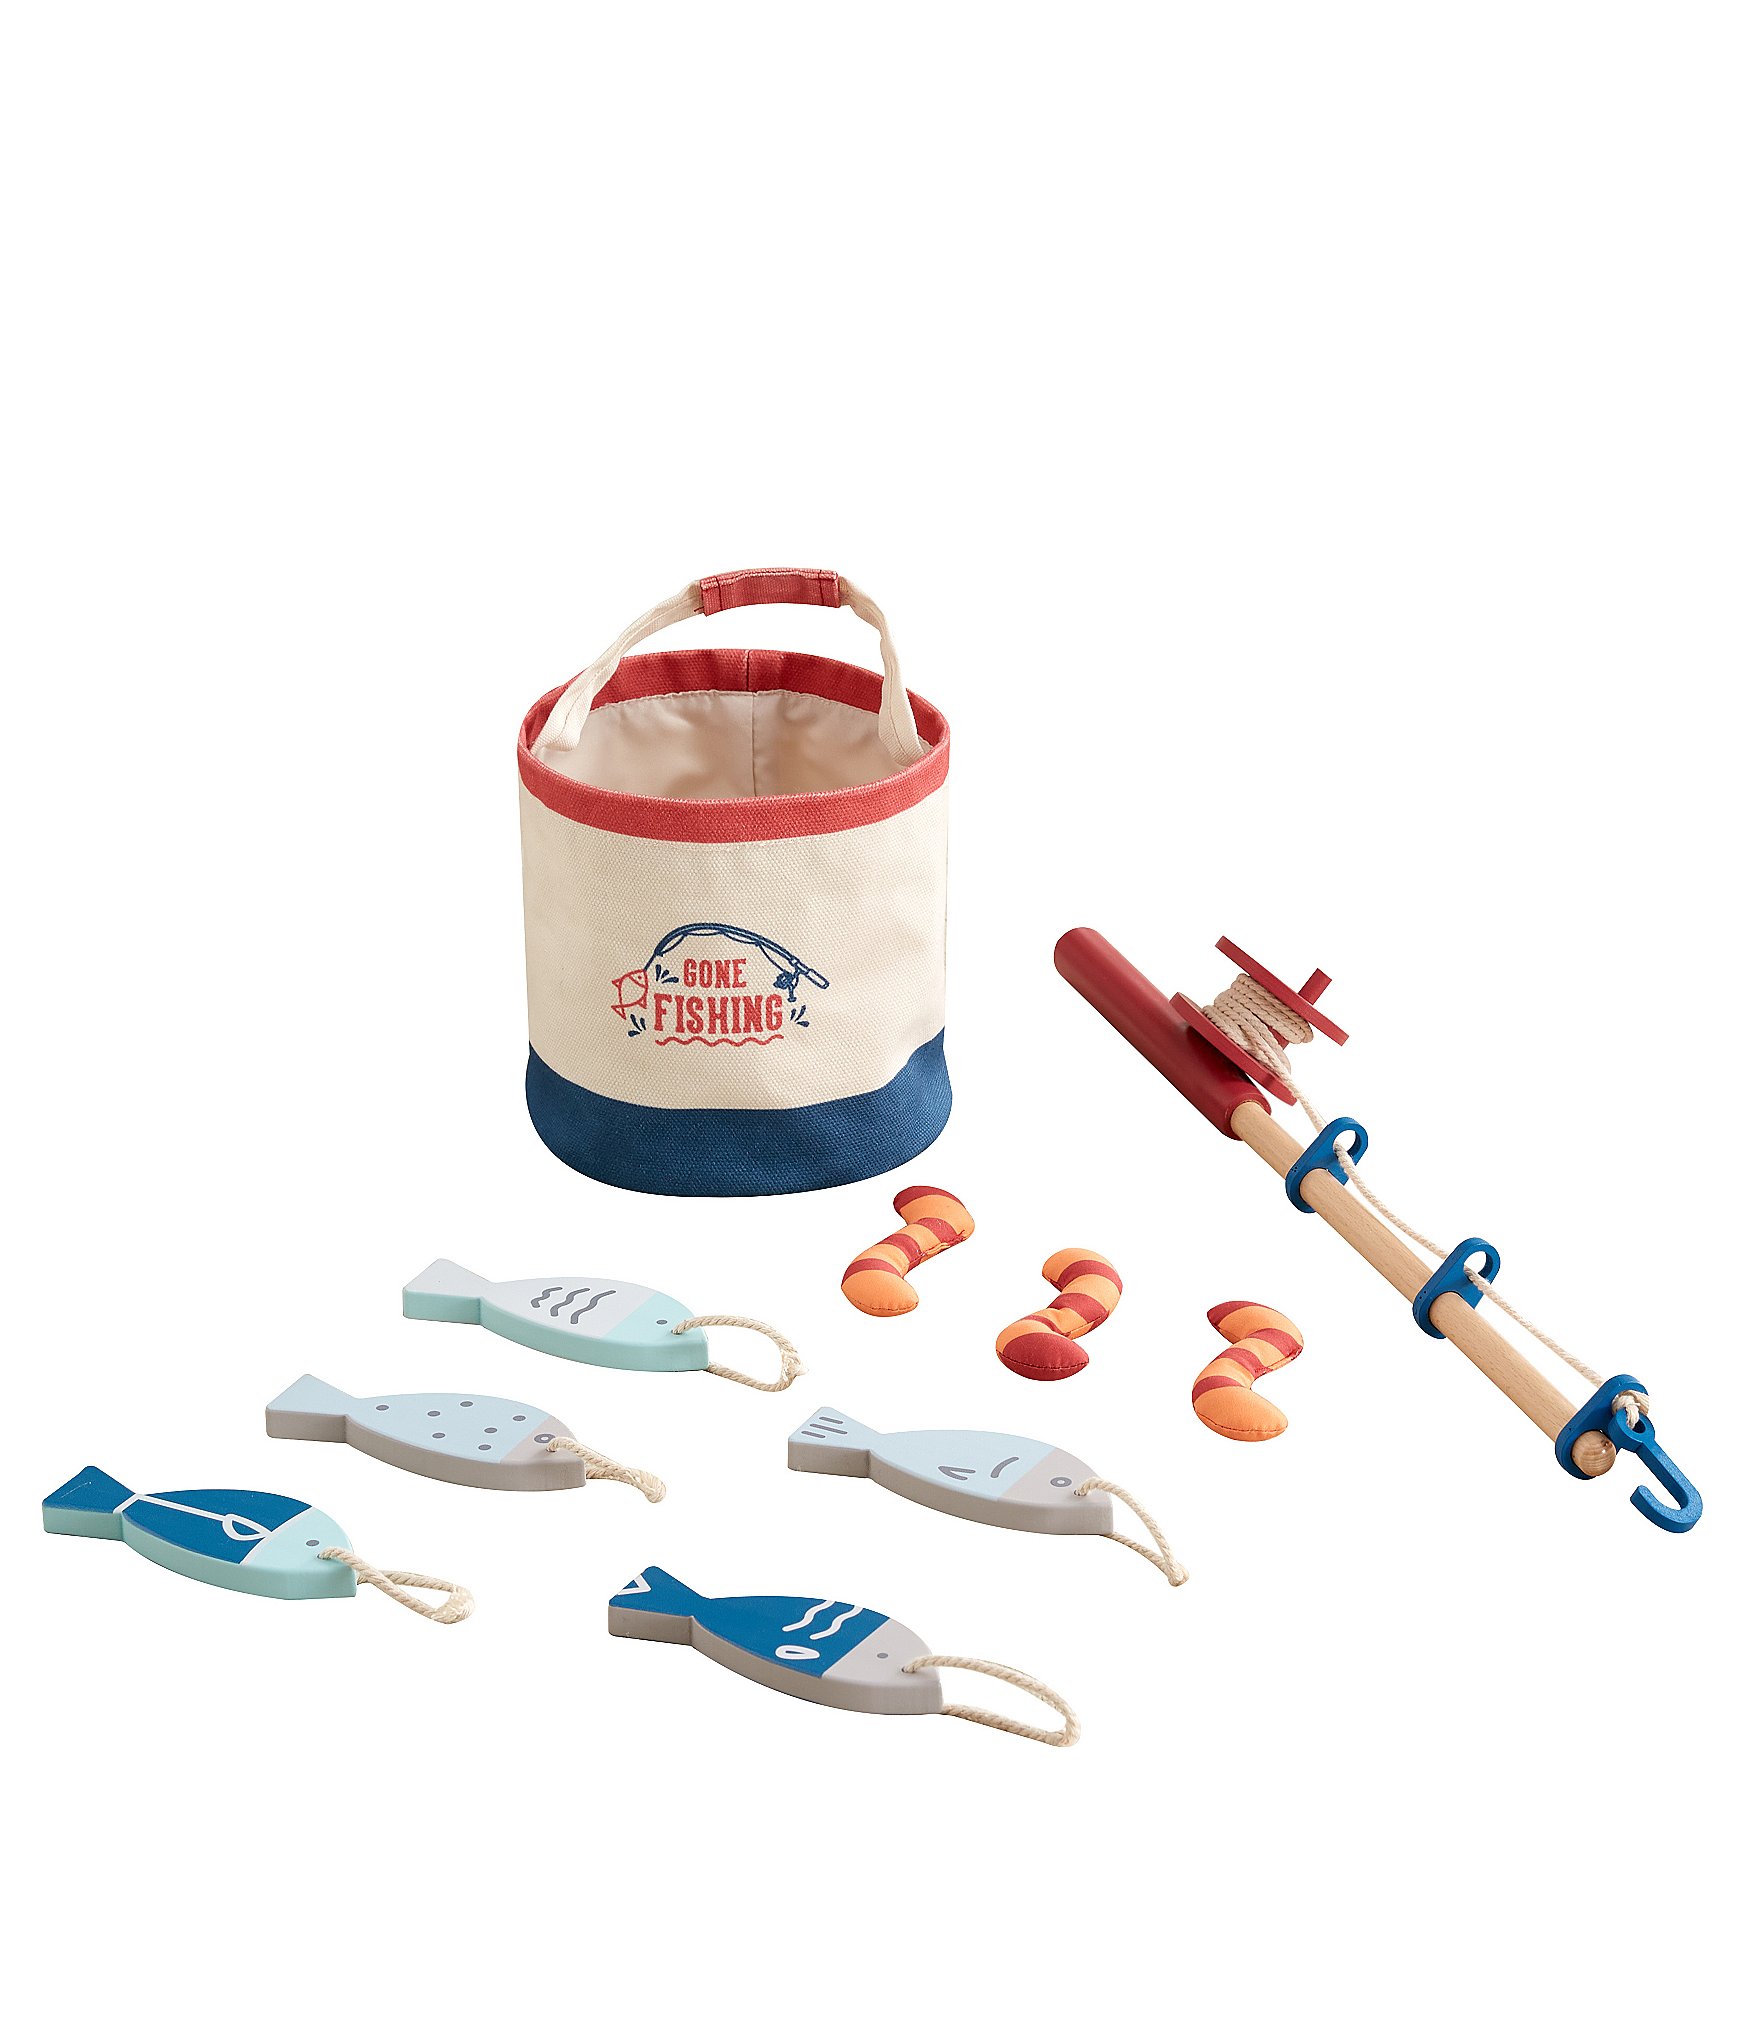 https://dimg.dillards.com/is/image/DillardsZoom/zoom/wonder--wise-by-asweets-gone-fishing-accessory-set/00000000_zi_b51ea6ff-21e7-49a2-b69d-b8754a0932fe.jpg